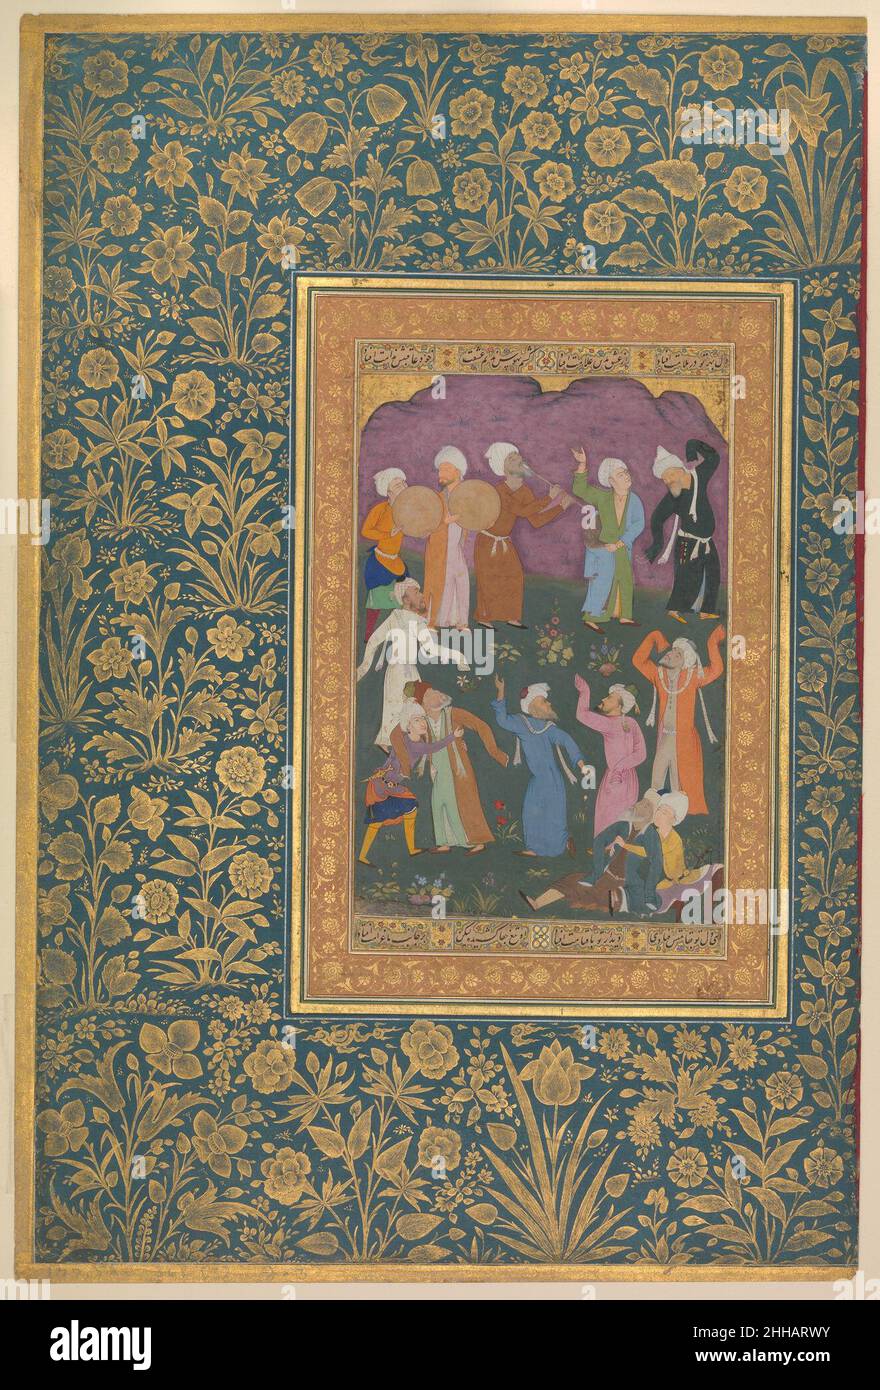 'Dancing Dervishes', Folio from the Shah Jahan Album recto: ca. 1610; verso: ca. 1530–50 Mir 'Ali Haravi Ecstatic dervishes in this painting perform the sama, or mystical whirling dance. Although this dance was practiced as a means of achieving mystical states from very early times in the Islamic world, it was institutionalized at the end of the thirteenth century by Sultan Walad, son of the great mystical poet Jalaluddin Rumi, who died at Konya (present-day Turkey) in 1273.. 'Dancing Dervishes', Folio from the Shah Jahan Album  454625 Stock Photo